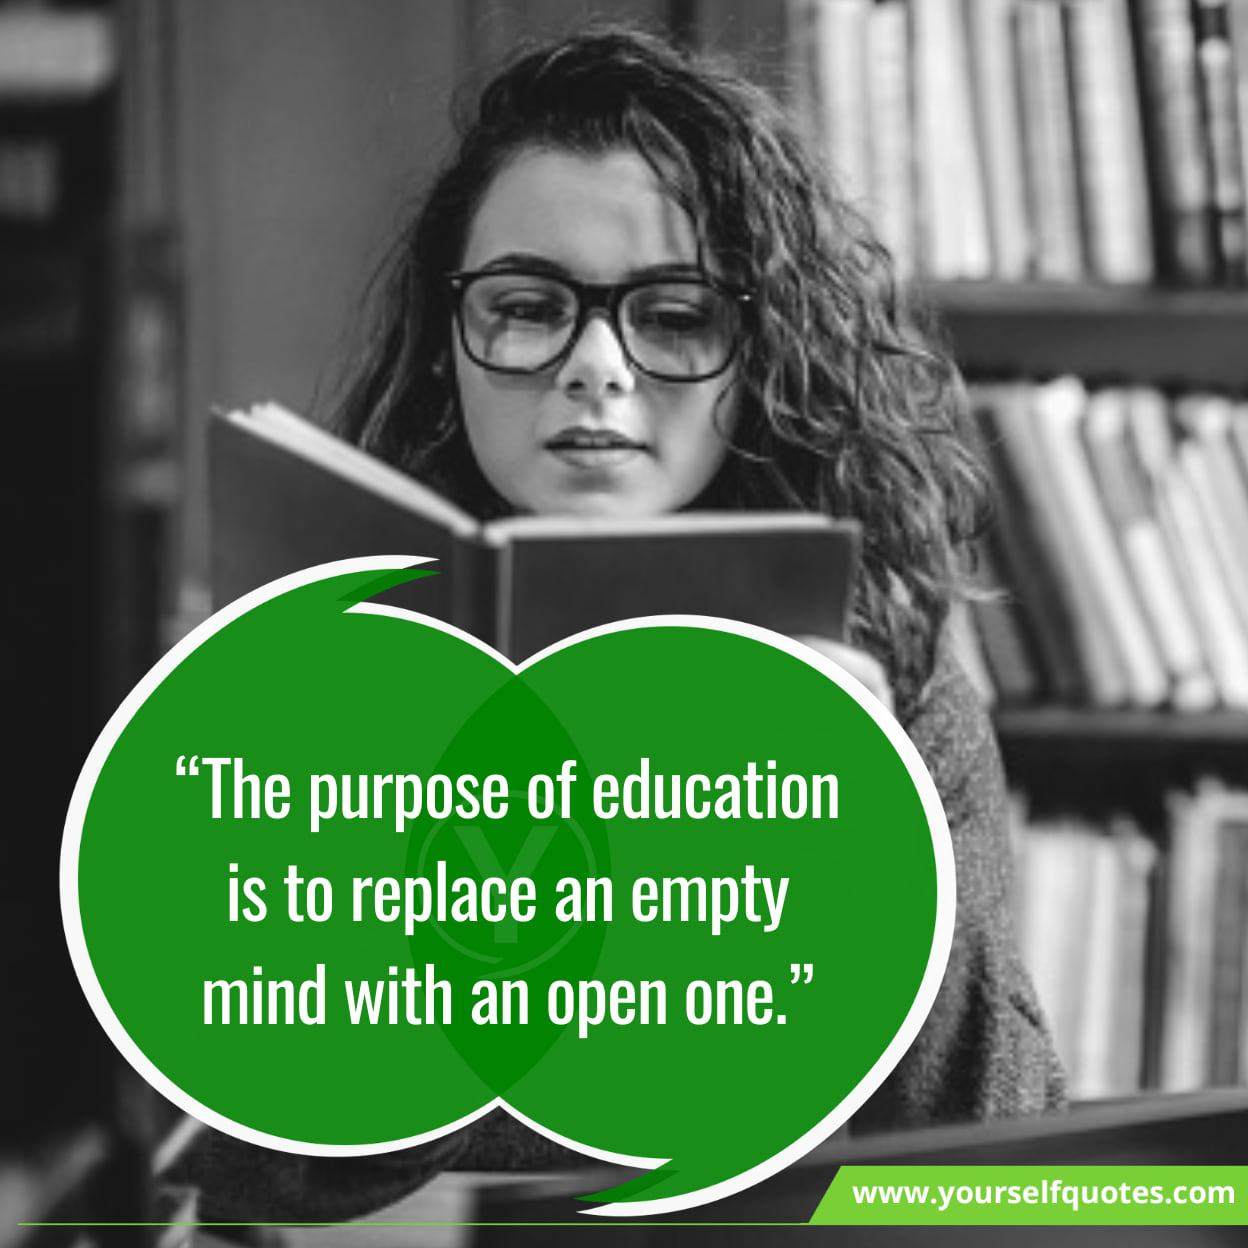 92 Educational Quotes For Students That Will Motivate You